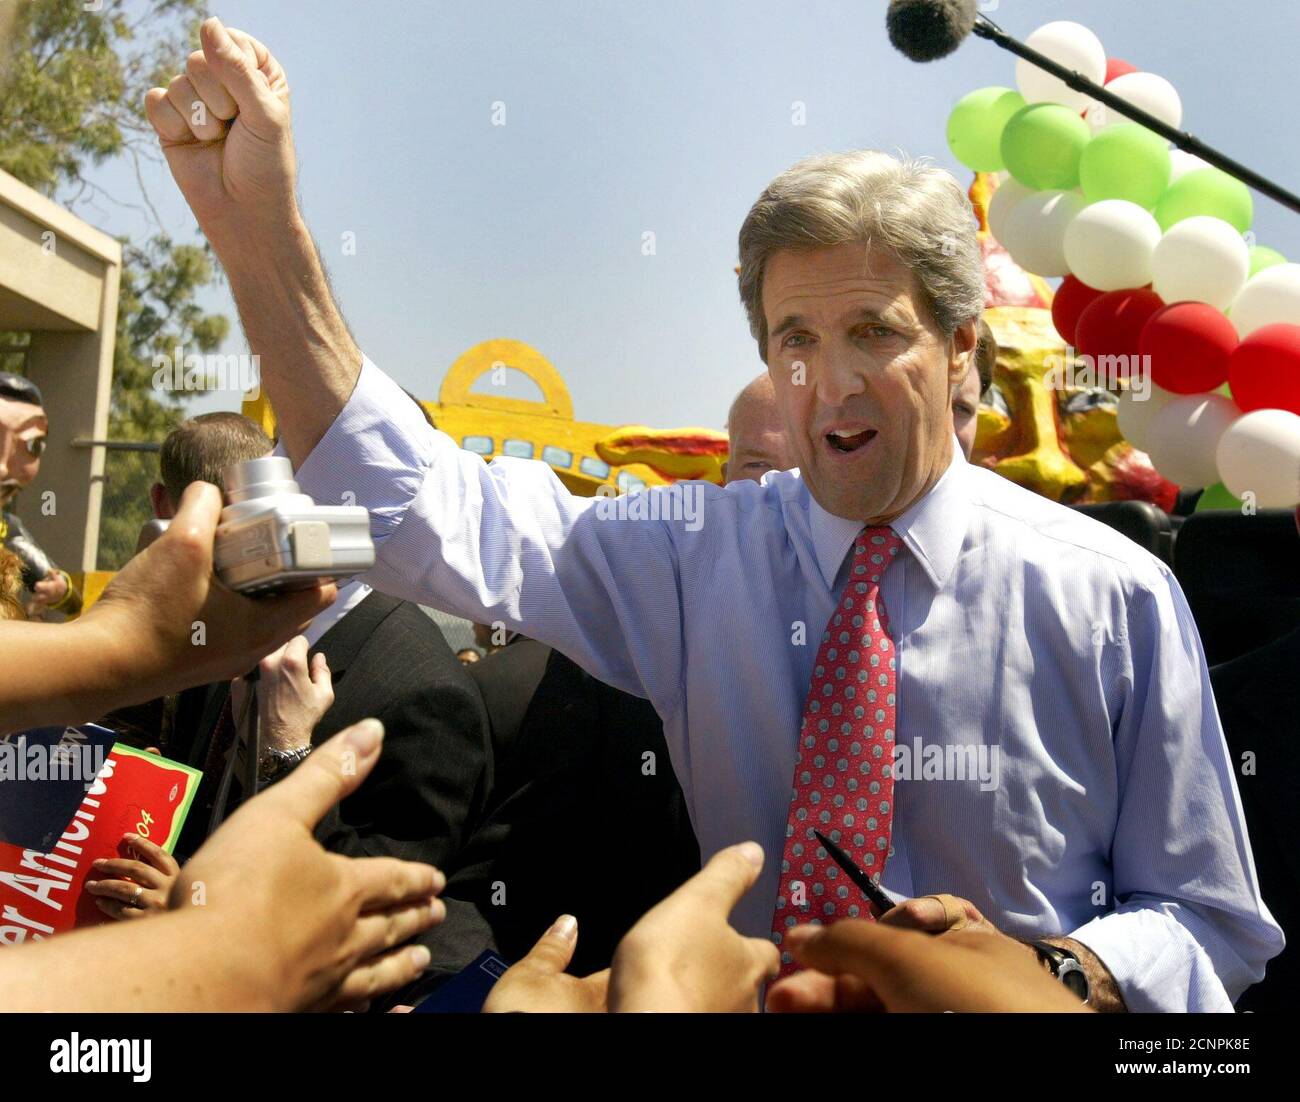 U.S. Democratic Presidential candidate John Kerry greets a crowd at Woodrow Wilson High School in Los Angeles, May 5, 2004. Kerry, the presumptive Democratic presidential nominee, has vowed to take a tougher line than U.S. President George W. Bush against foreign exchange manipulation. Last week, he pledged 'a no-nonsense effort to stop illegal currency manipulation that's going in countries like China and Japan.' REUTERS/Lucy Nicholson US ELECTION  LN/GN Stock Photo